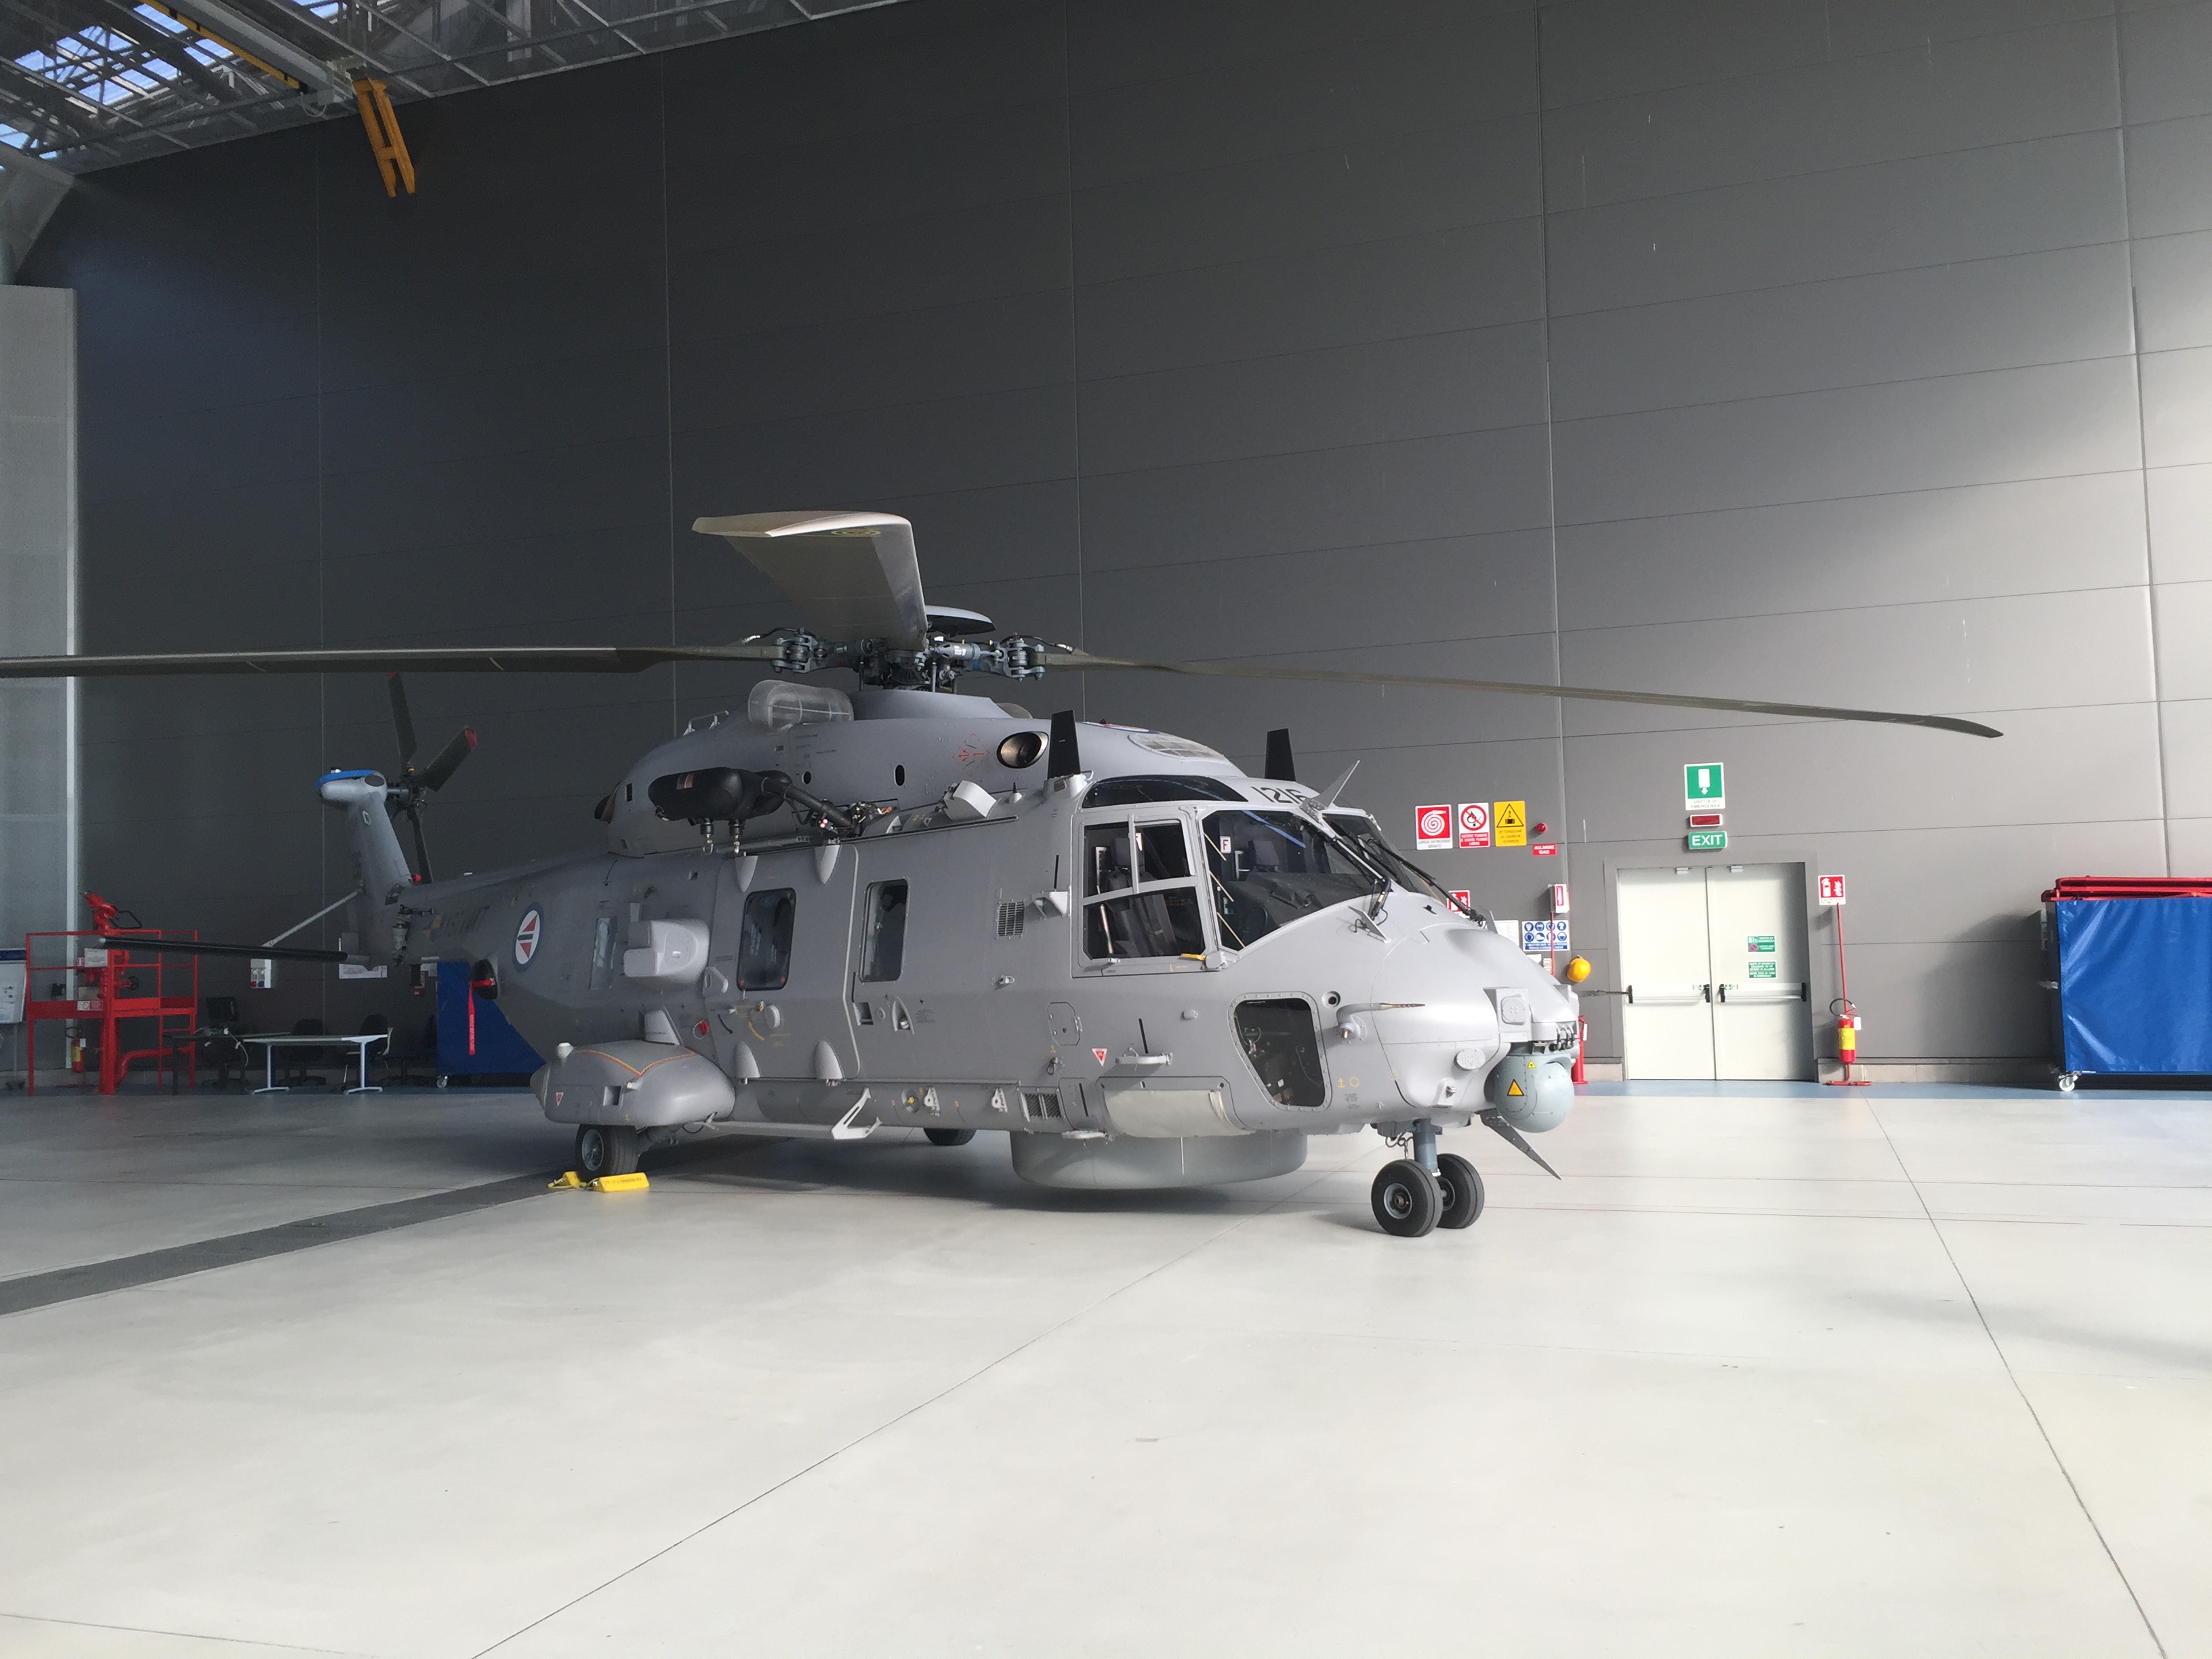 NHI successfully completed the test campaign of the self-protection suite of the Norwegian NH90. The aircraft NH90 NNWN01 prototype was manned by Finmeccanica Helicopter Division flight test team (Test Pilot Roger Mowbray and Flight Test Engineer Fabrizio Santarossa) and supported by a multi-national, multi-disciplined team from several organisations.